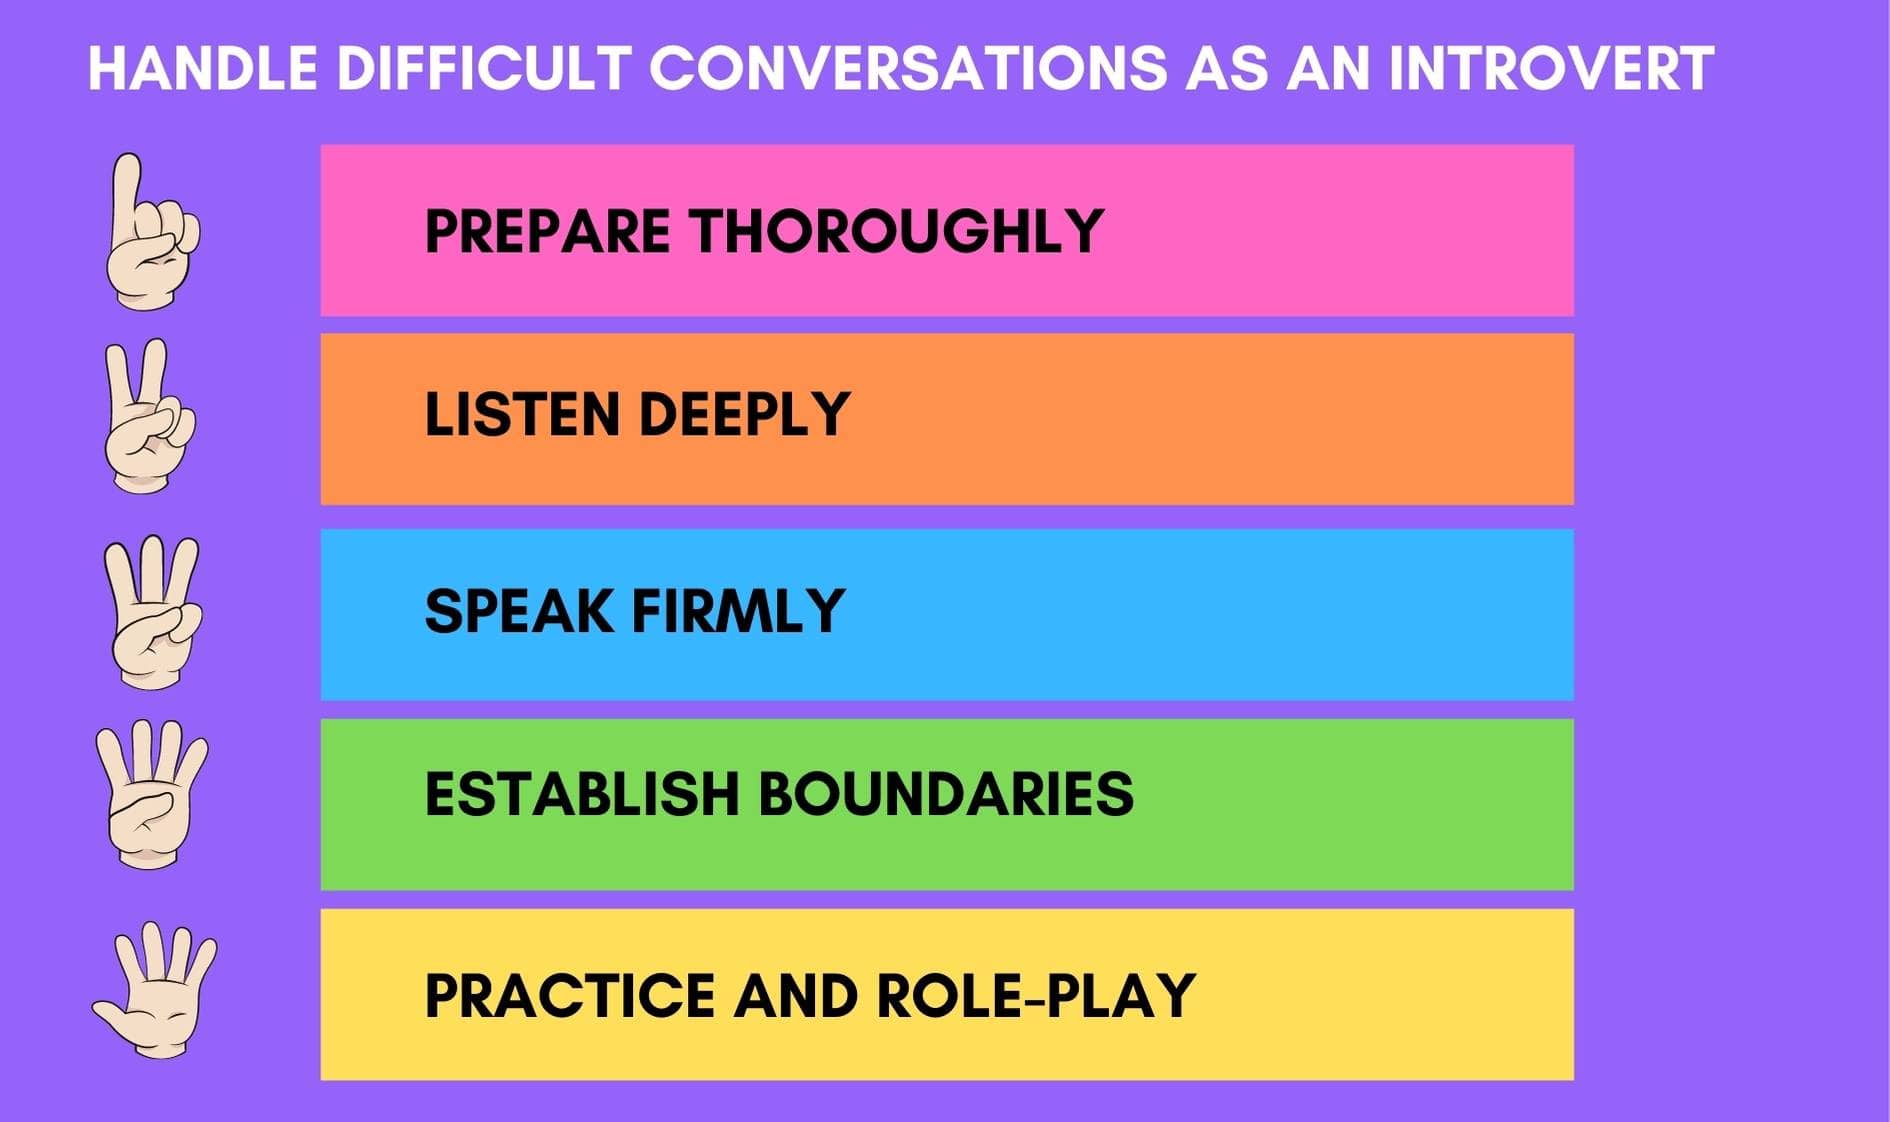 How To Communicate and Handle Difficult Conversations as an Introvert